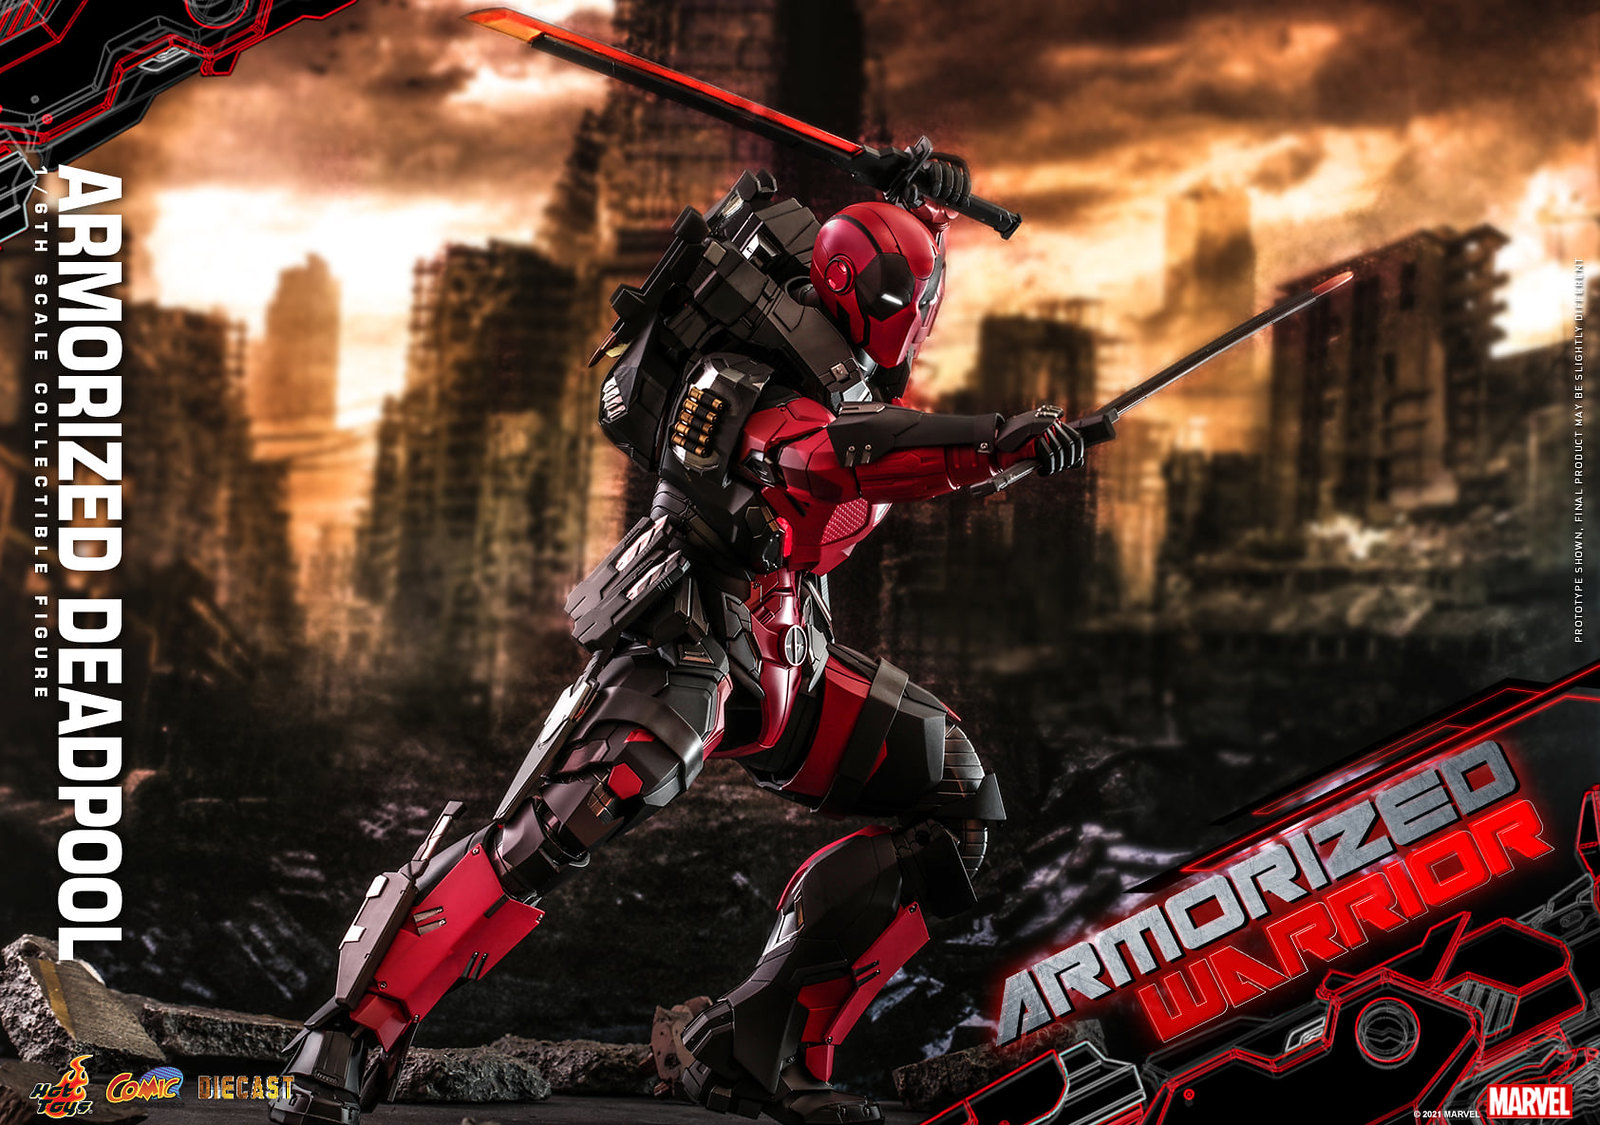 NEW PRODUCT: Hot Toys Armorized Warrior - 1/6th scale Armorized Deadpool Collectible Figure [Armorized Warrior Collection] 51312243050_a0fa2dd946_h